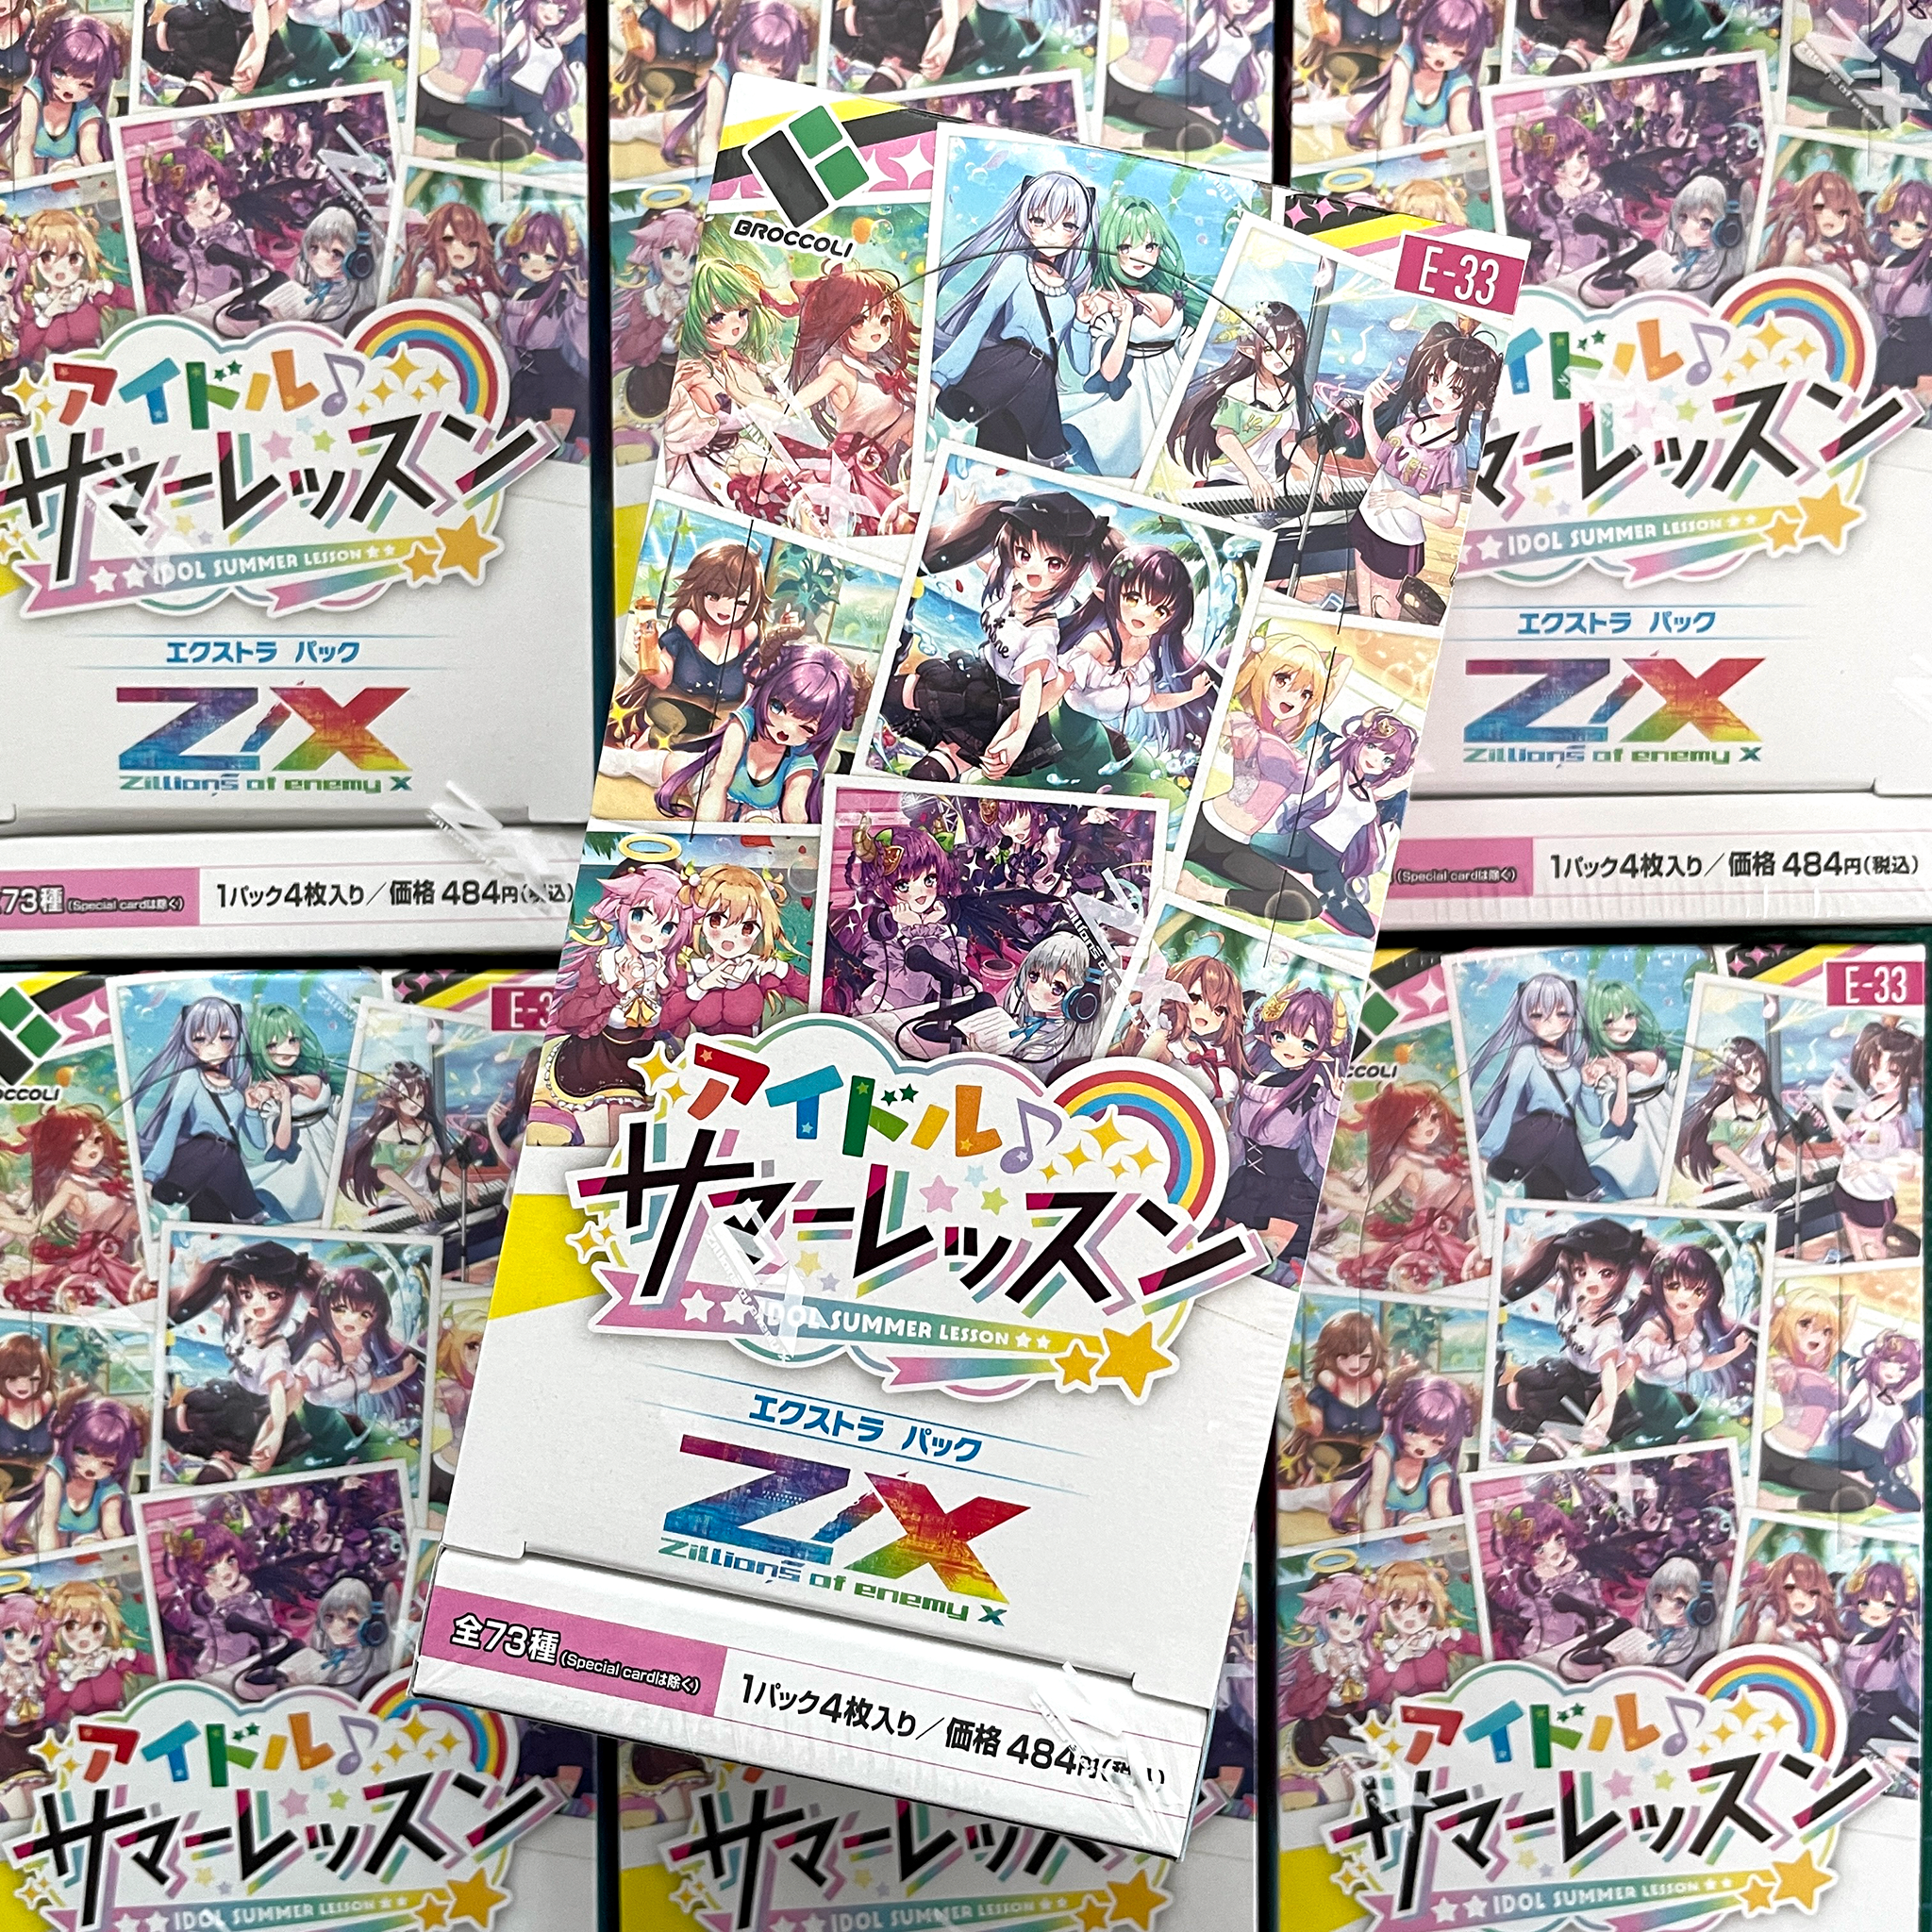 [E-33] Z/X Zillions of enemy X EXTRA Pack 第33弾 ｢IDOL ♪ SUMMER LESSON｣ Box  Release date: July 23 2022  10 booster pack / box  4 cards / booster pack